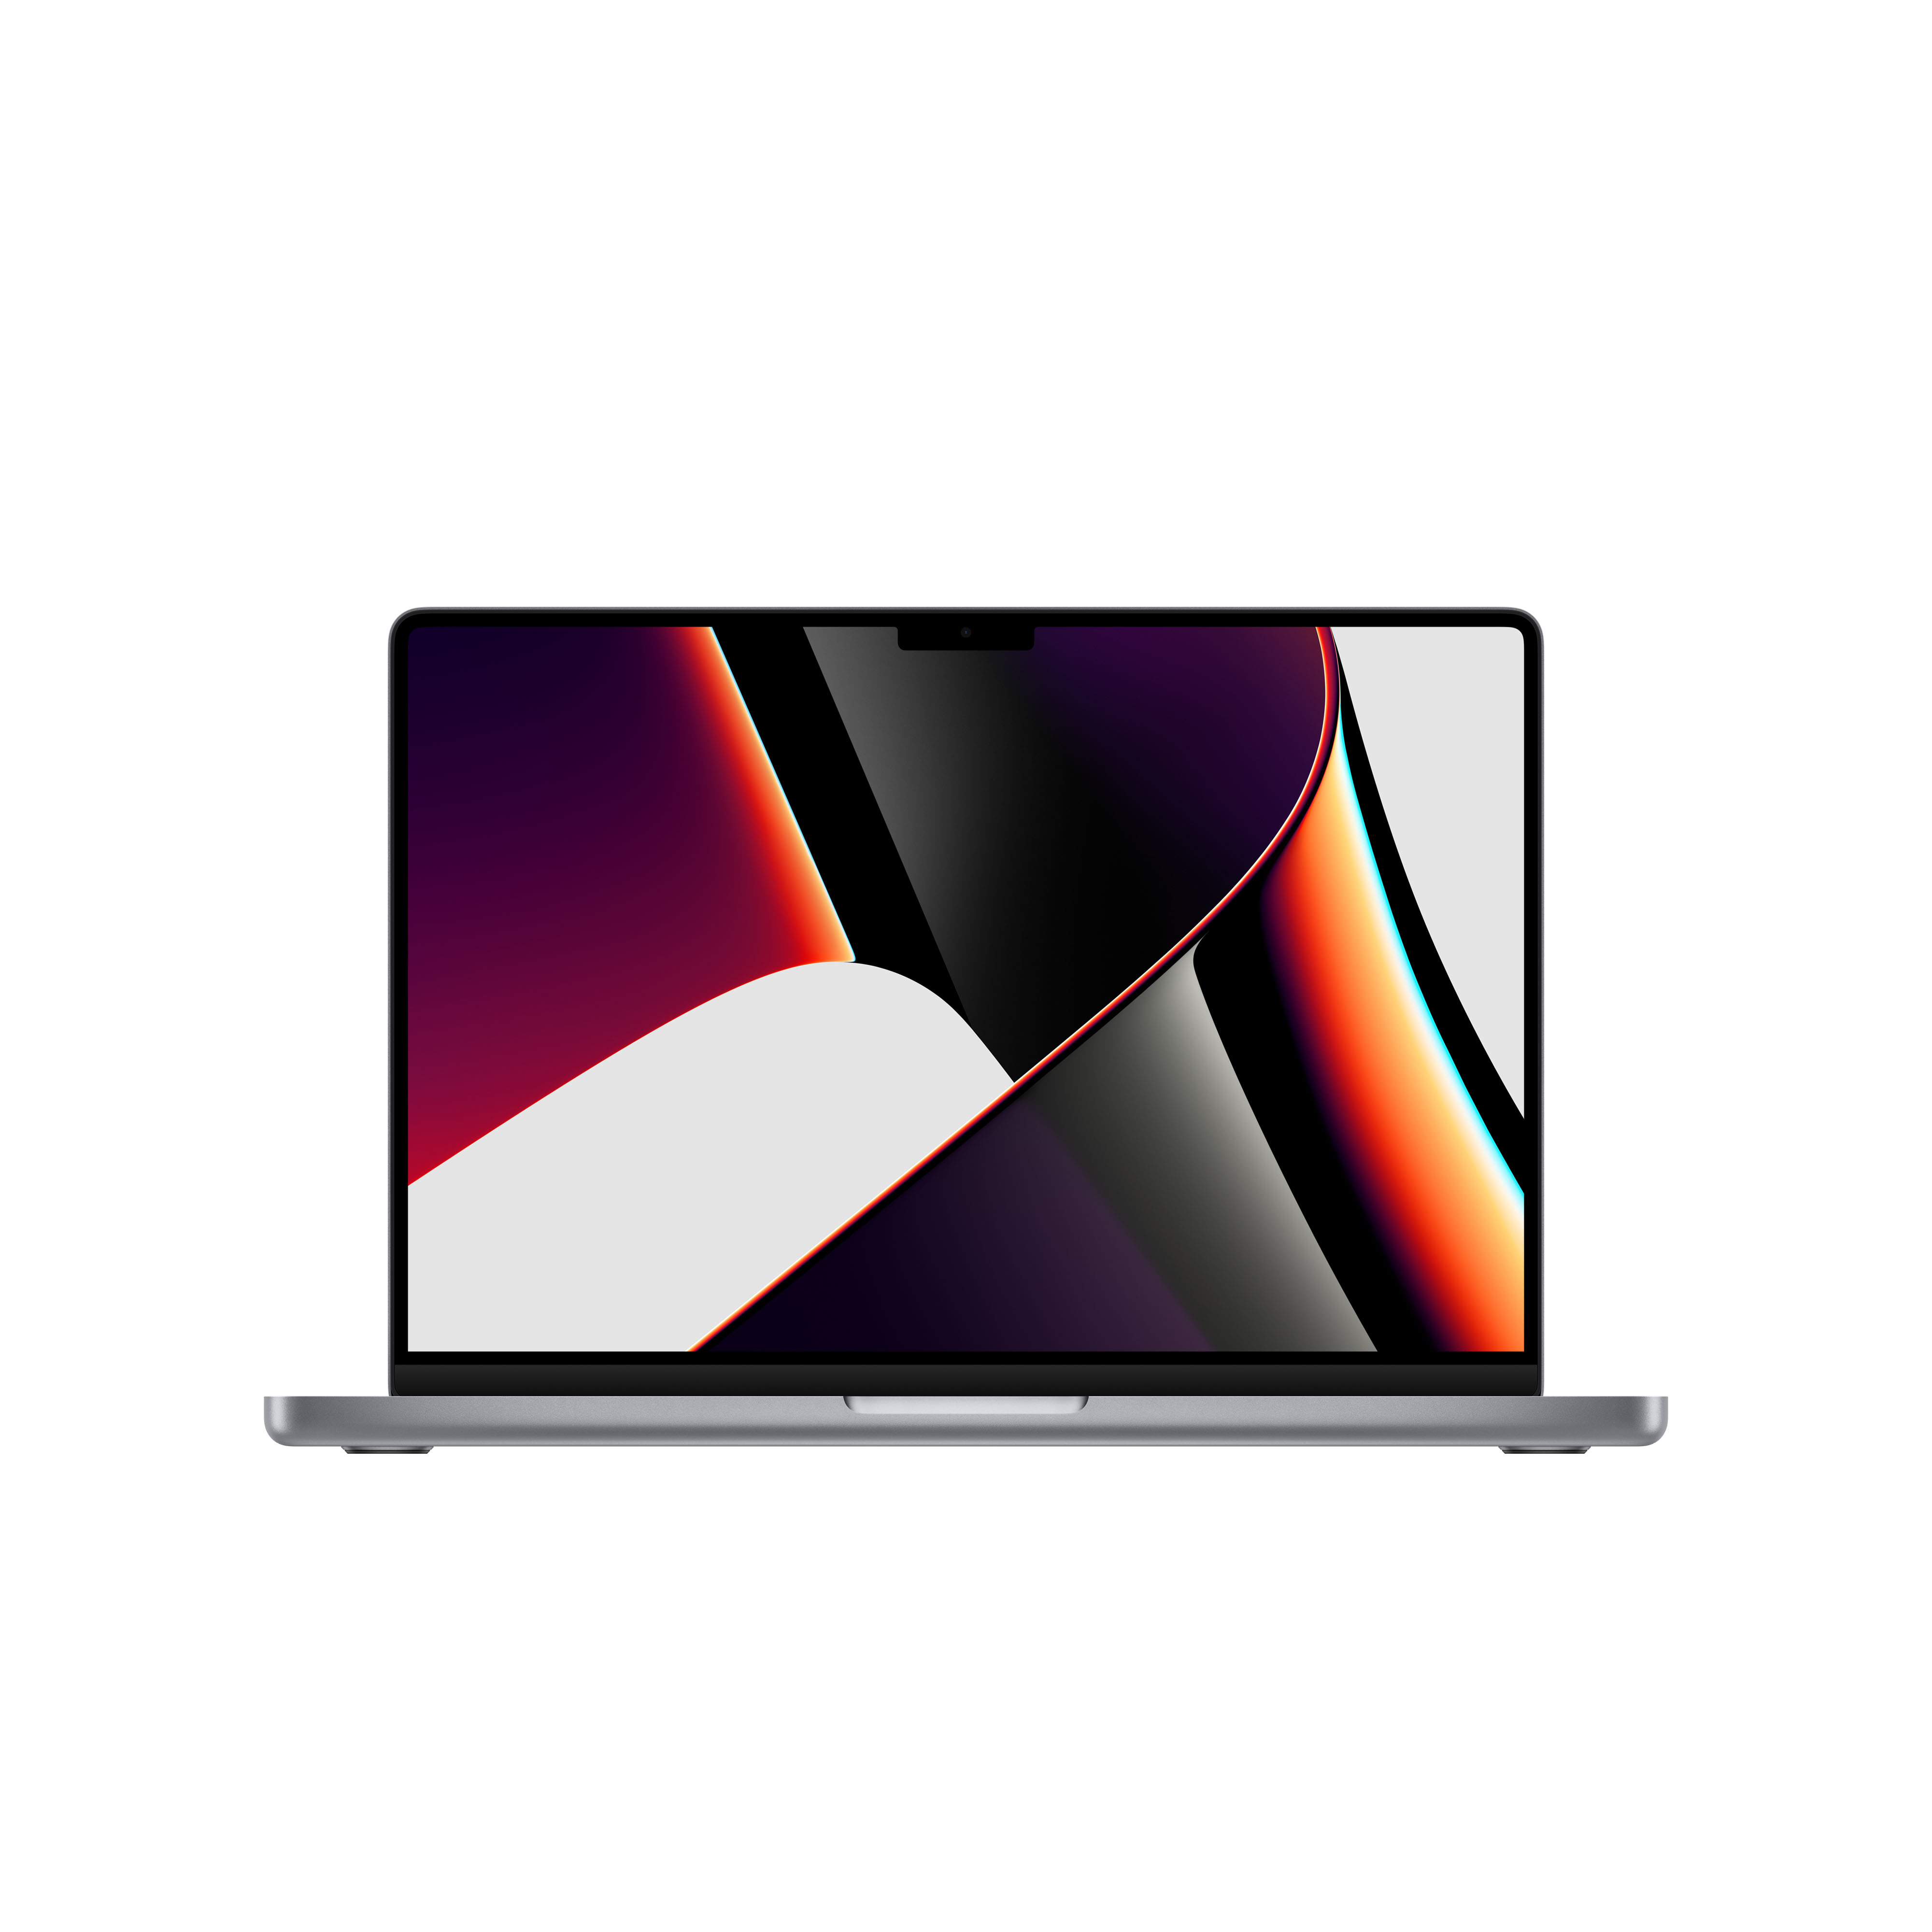  14inch (2021) MacBook Pro  M1 Pro chip with 10-core CPU and 16-core GPU 1TB SSD Space Grey Qwerty